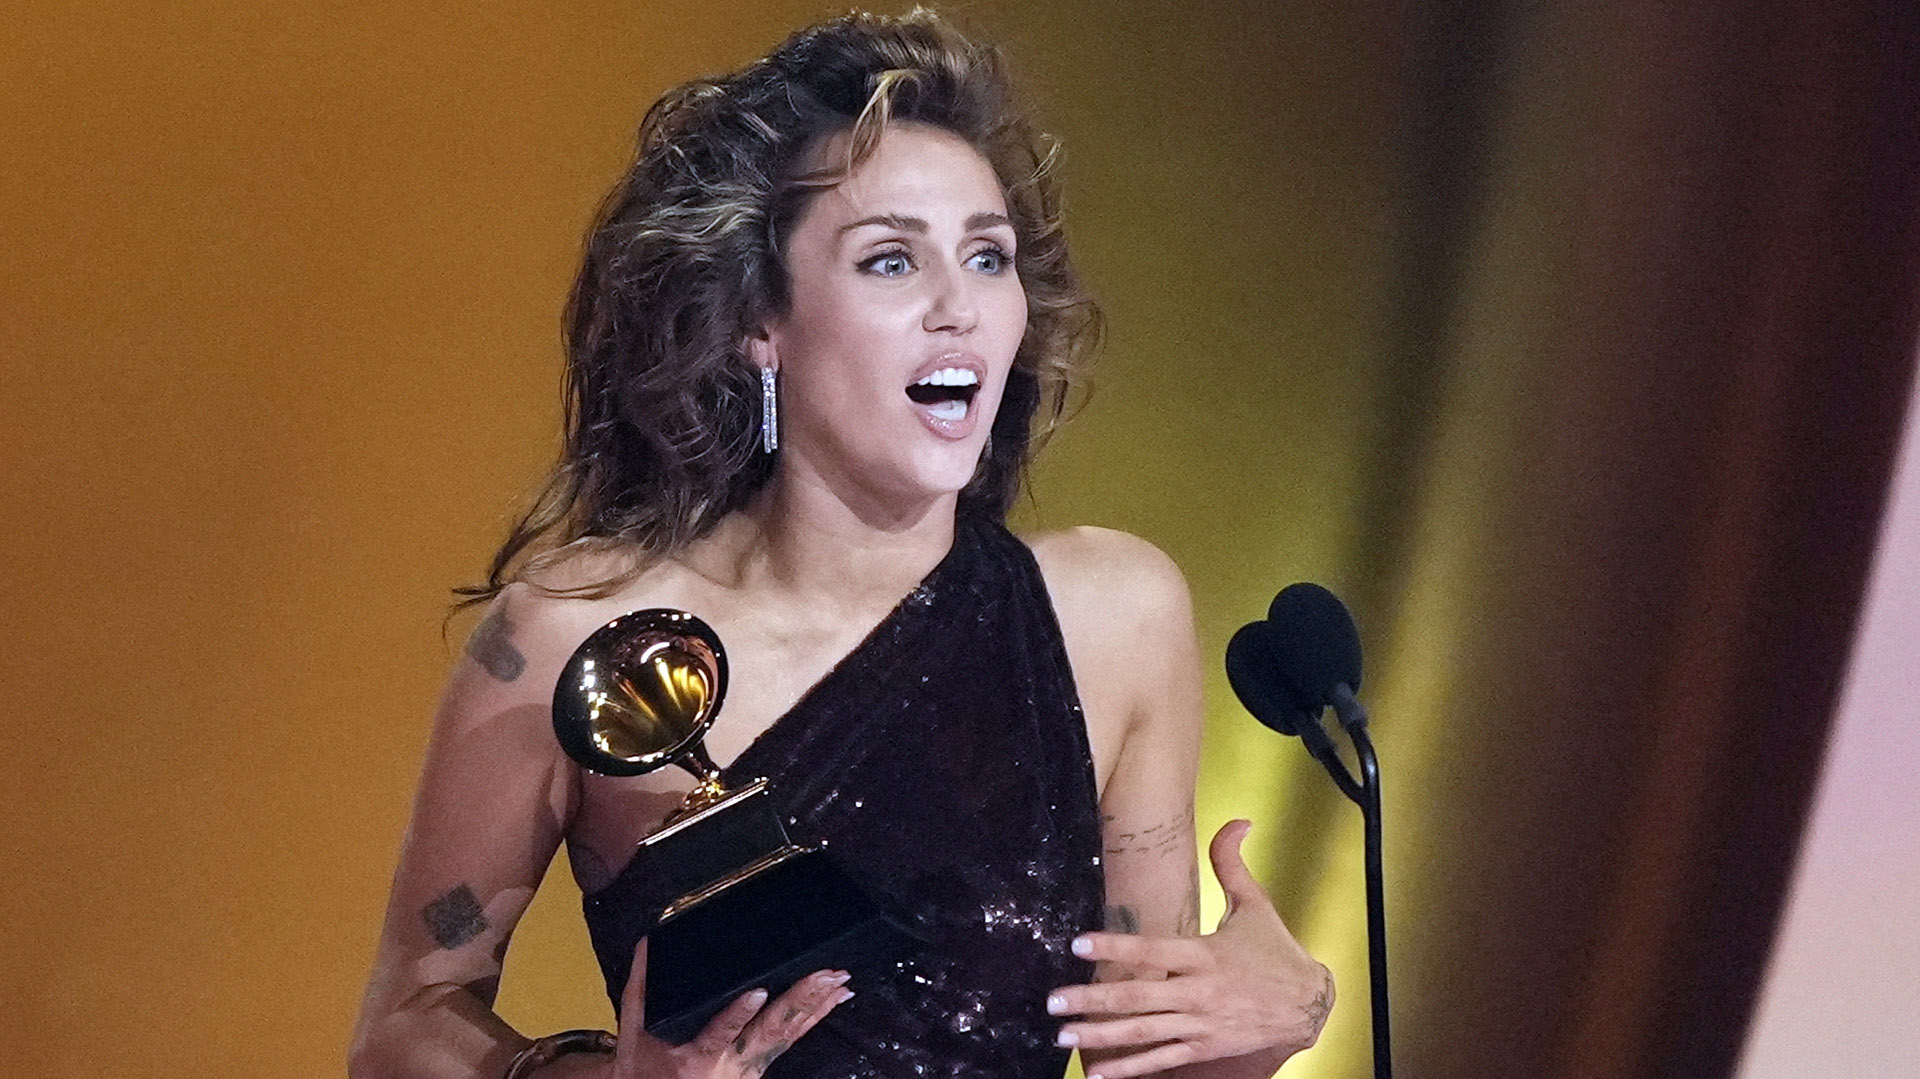 Why Does Miley Cyrus's Grammy Award Matter?